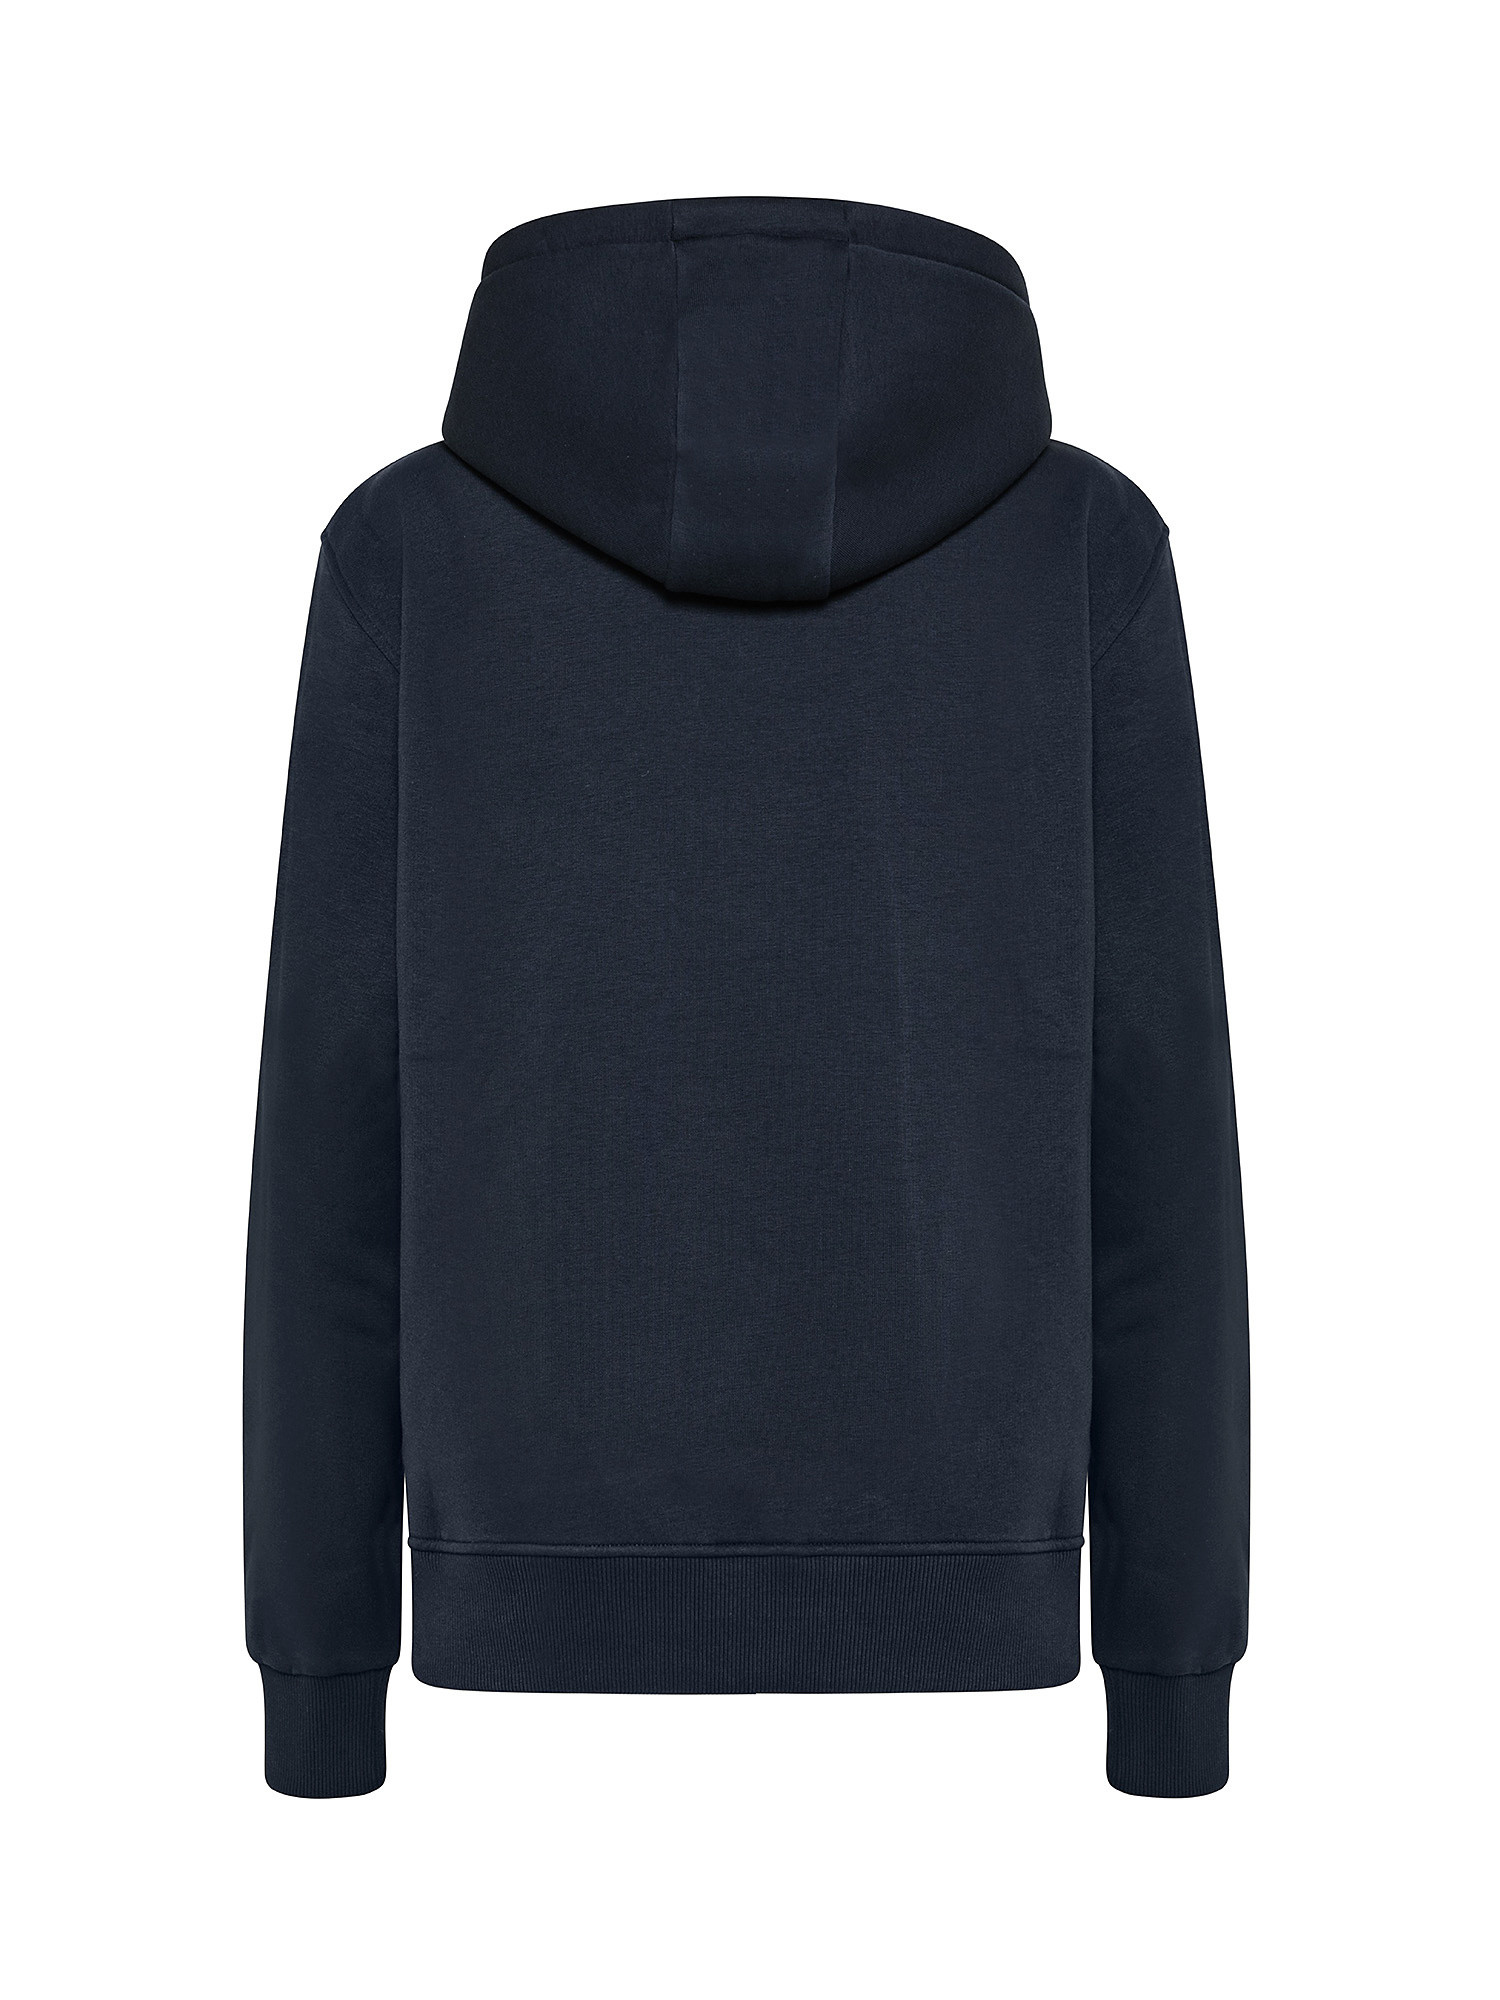 Hoodie sweatshirt with embroidery on chest, Blue, large image number 1